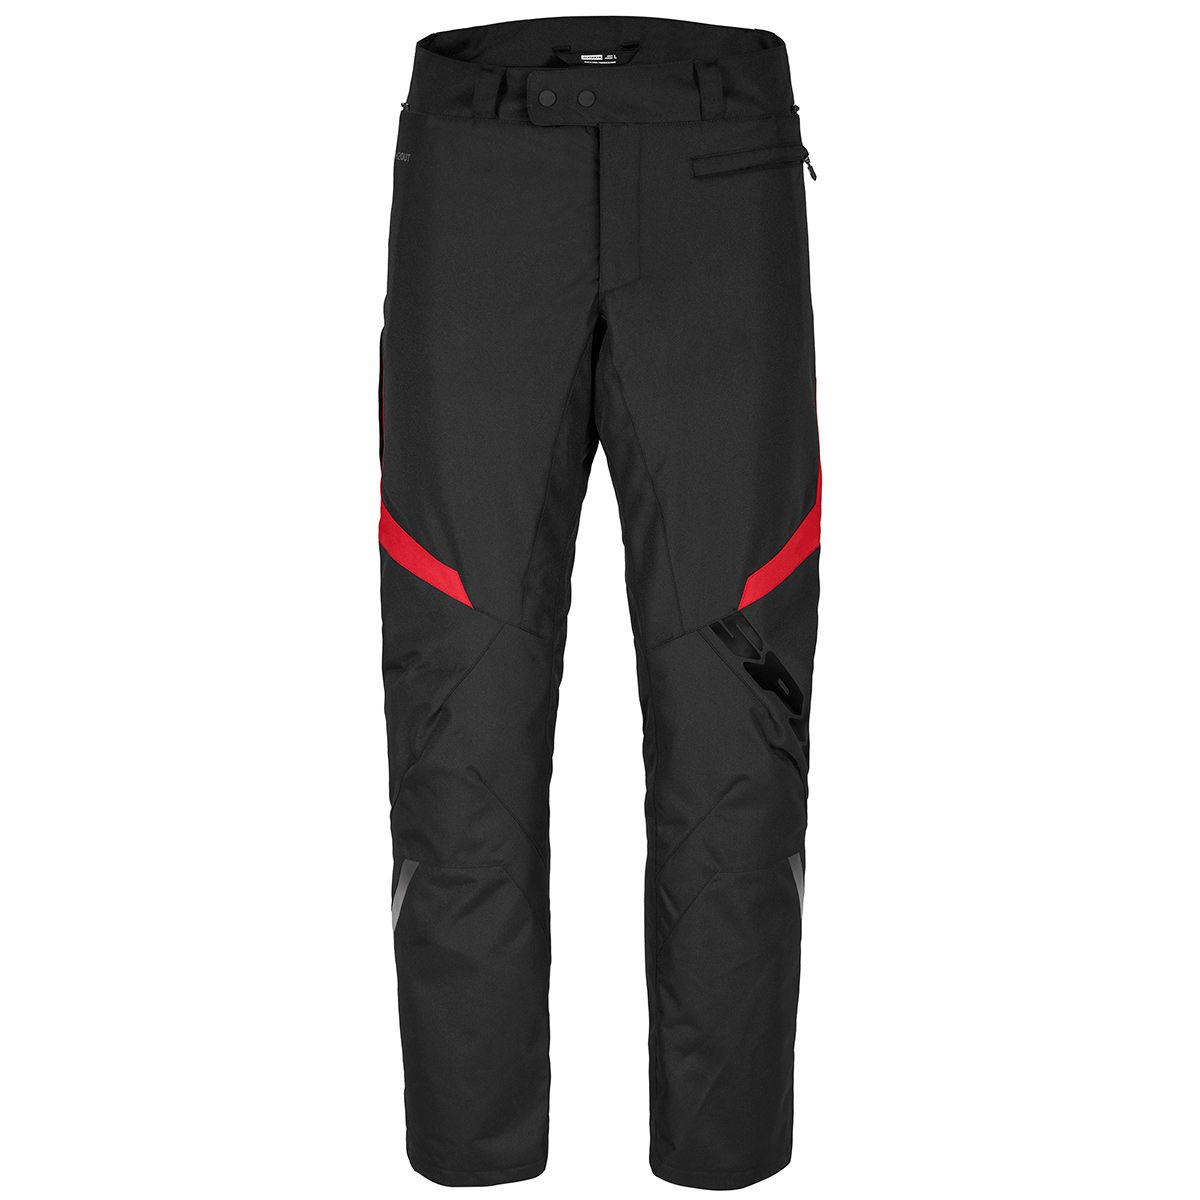 Image of Spidi Sportmaster Pants Black Red Size 2XL ID 8030161478235